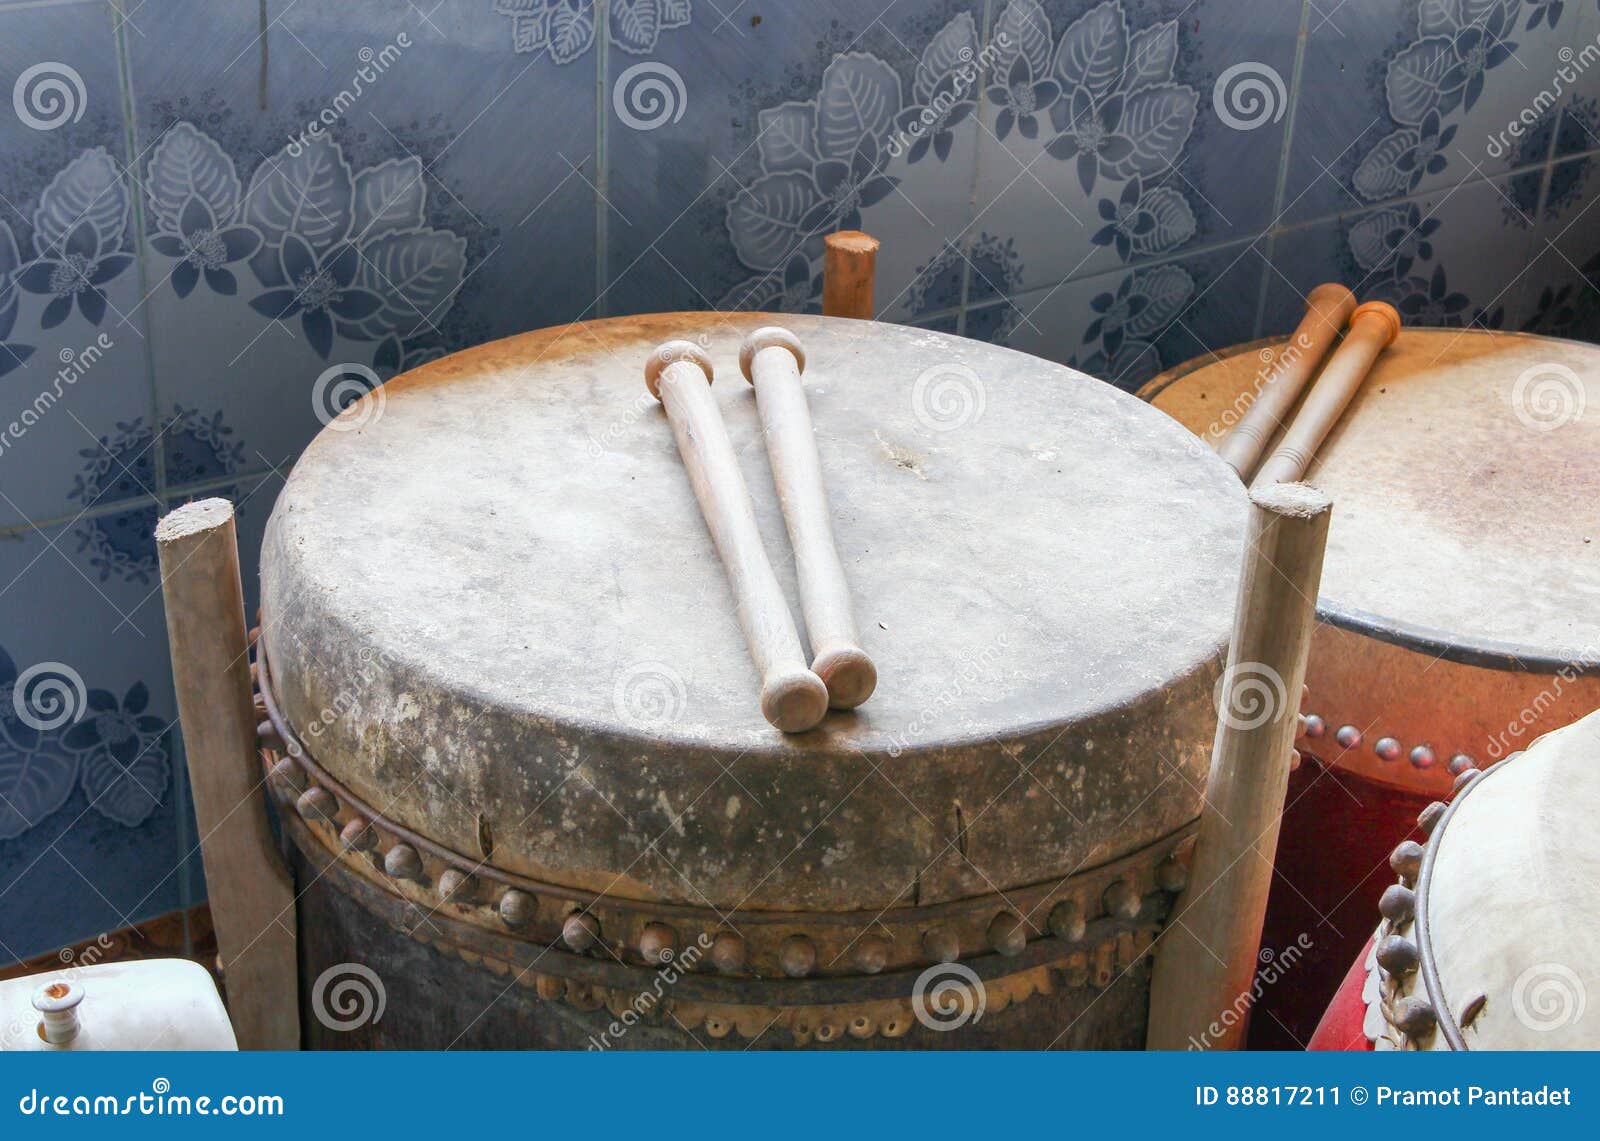 Drum Big Ancient Temple in Thailand Stock Image - Image of skin ...